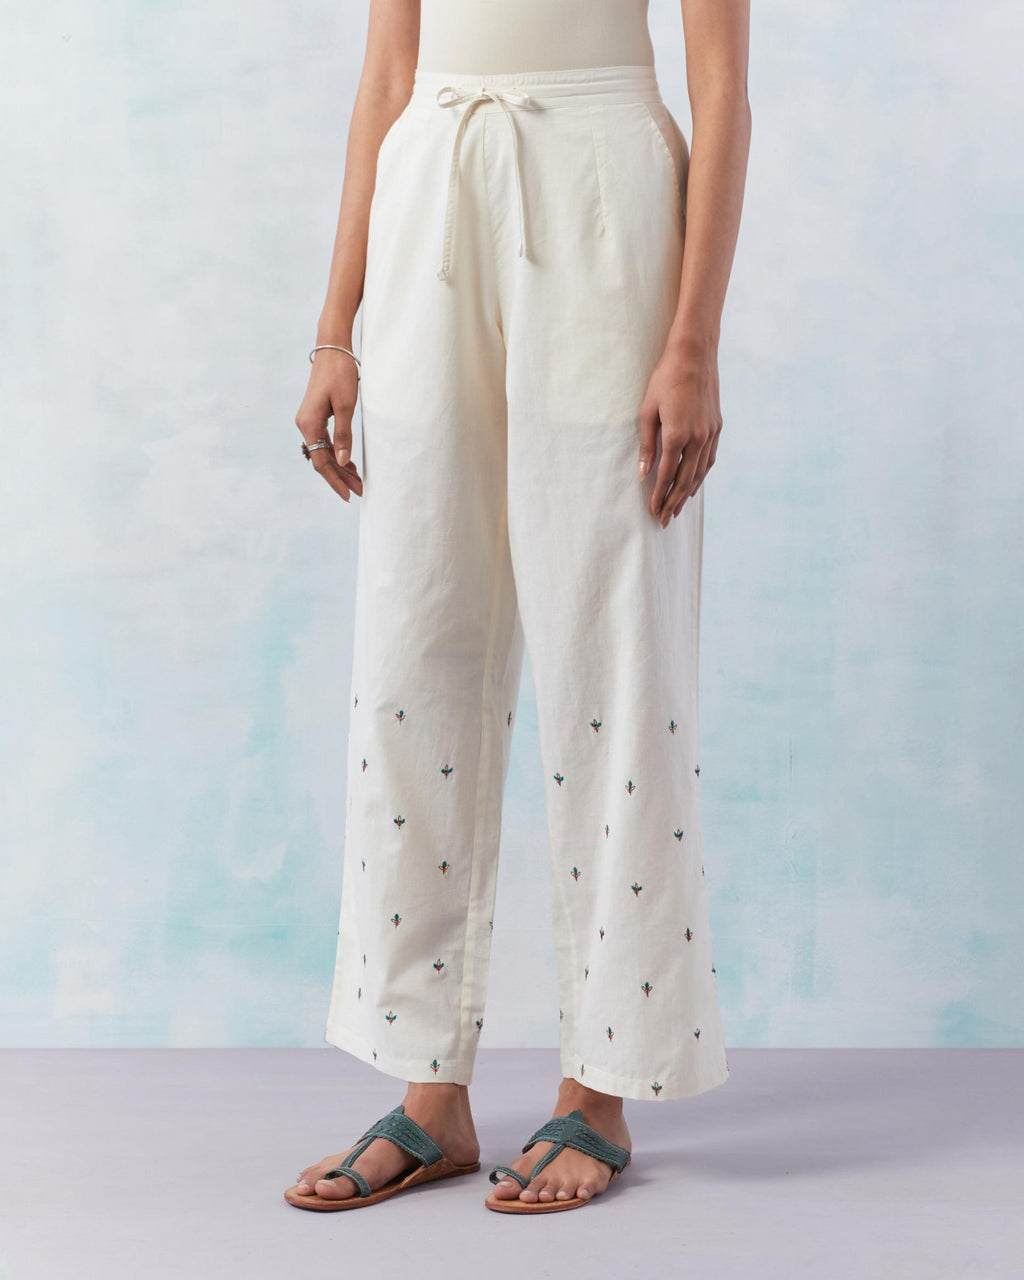 Off white cotton straight pants detailed with small flower embroidery at bottom.